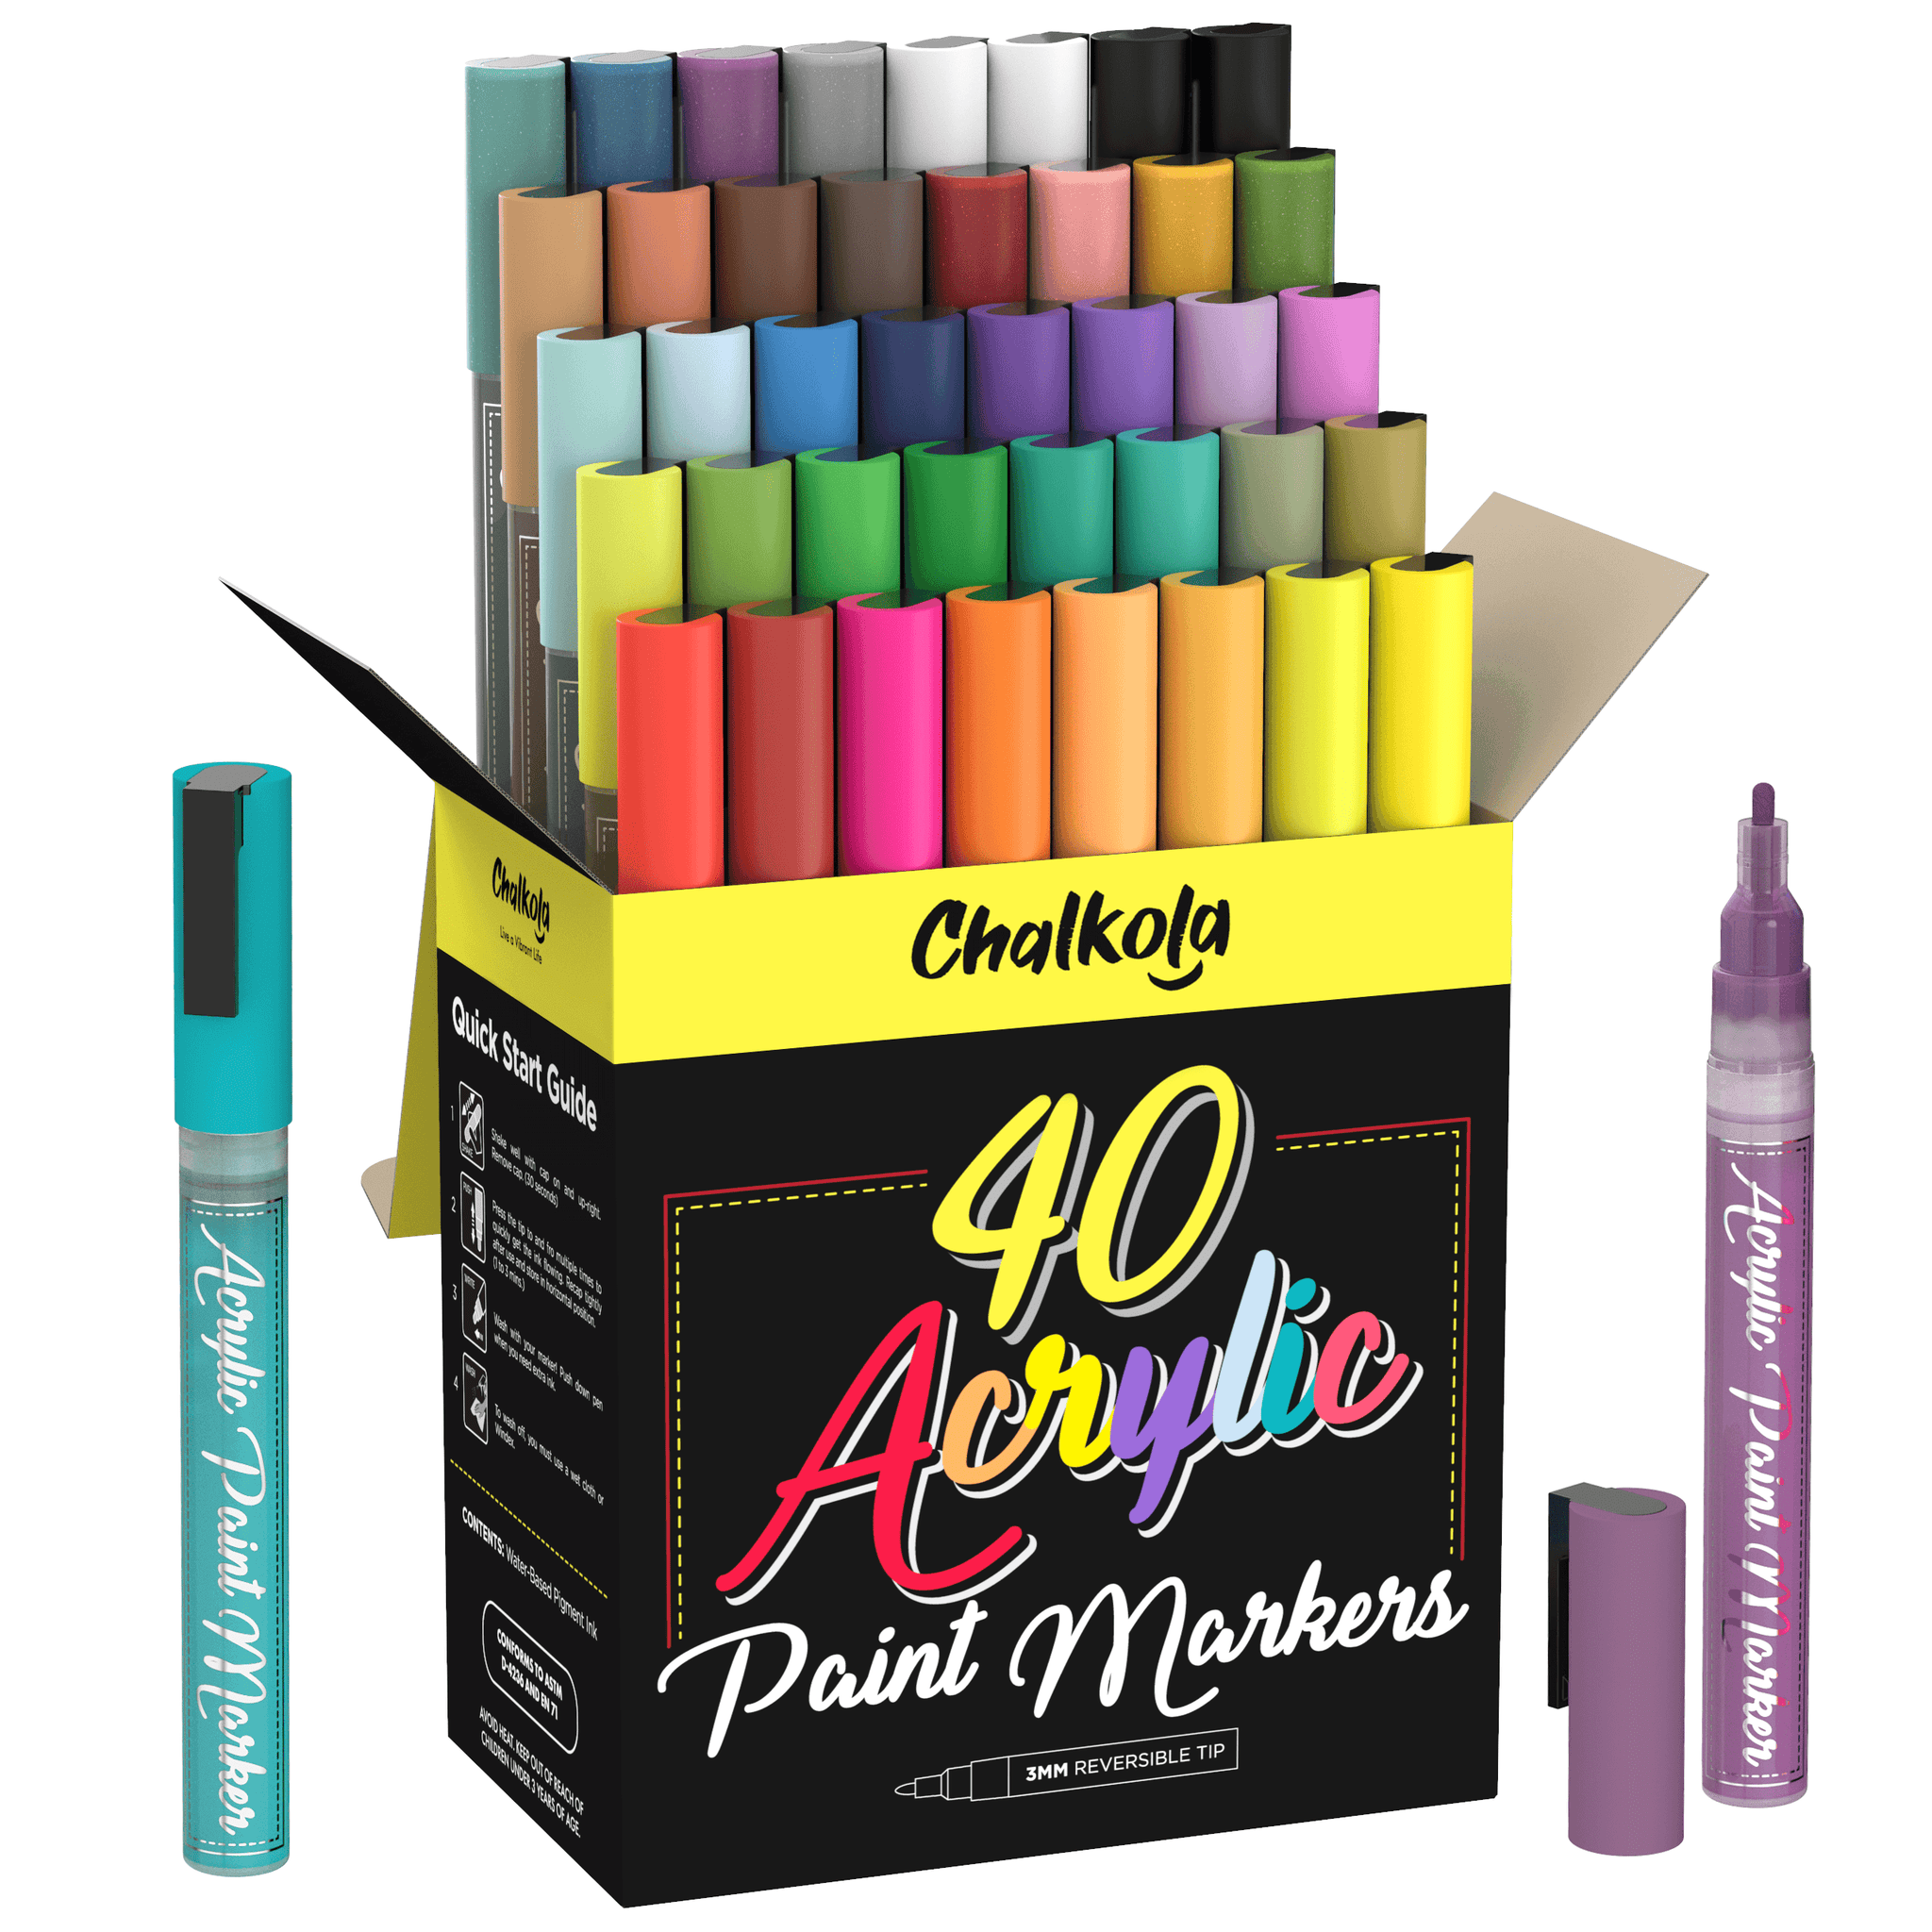 Acrylic Paint Markers WholeSale - Price List, Bulk Buy at